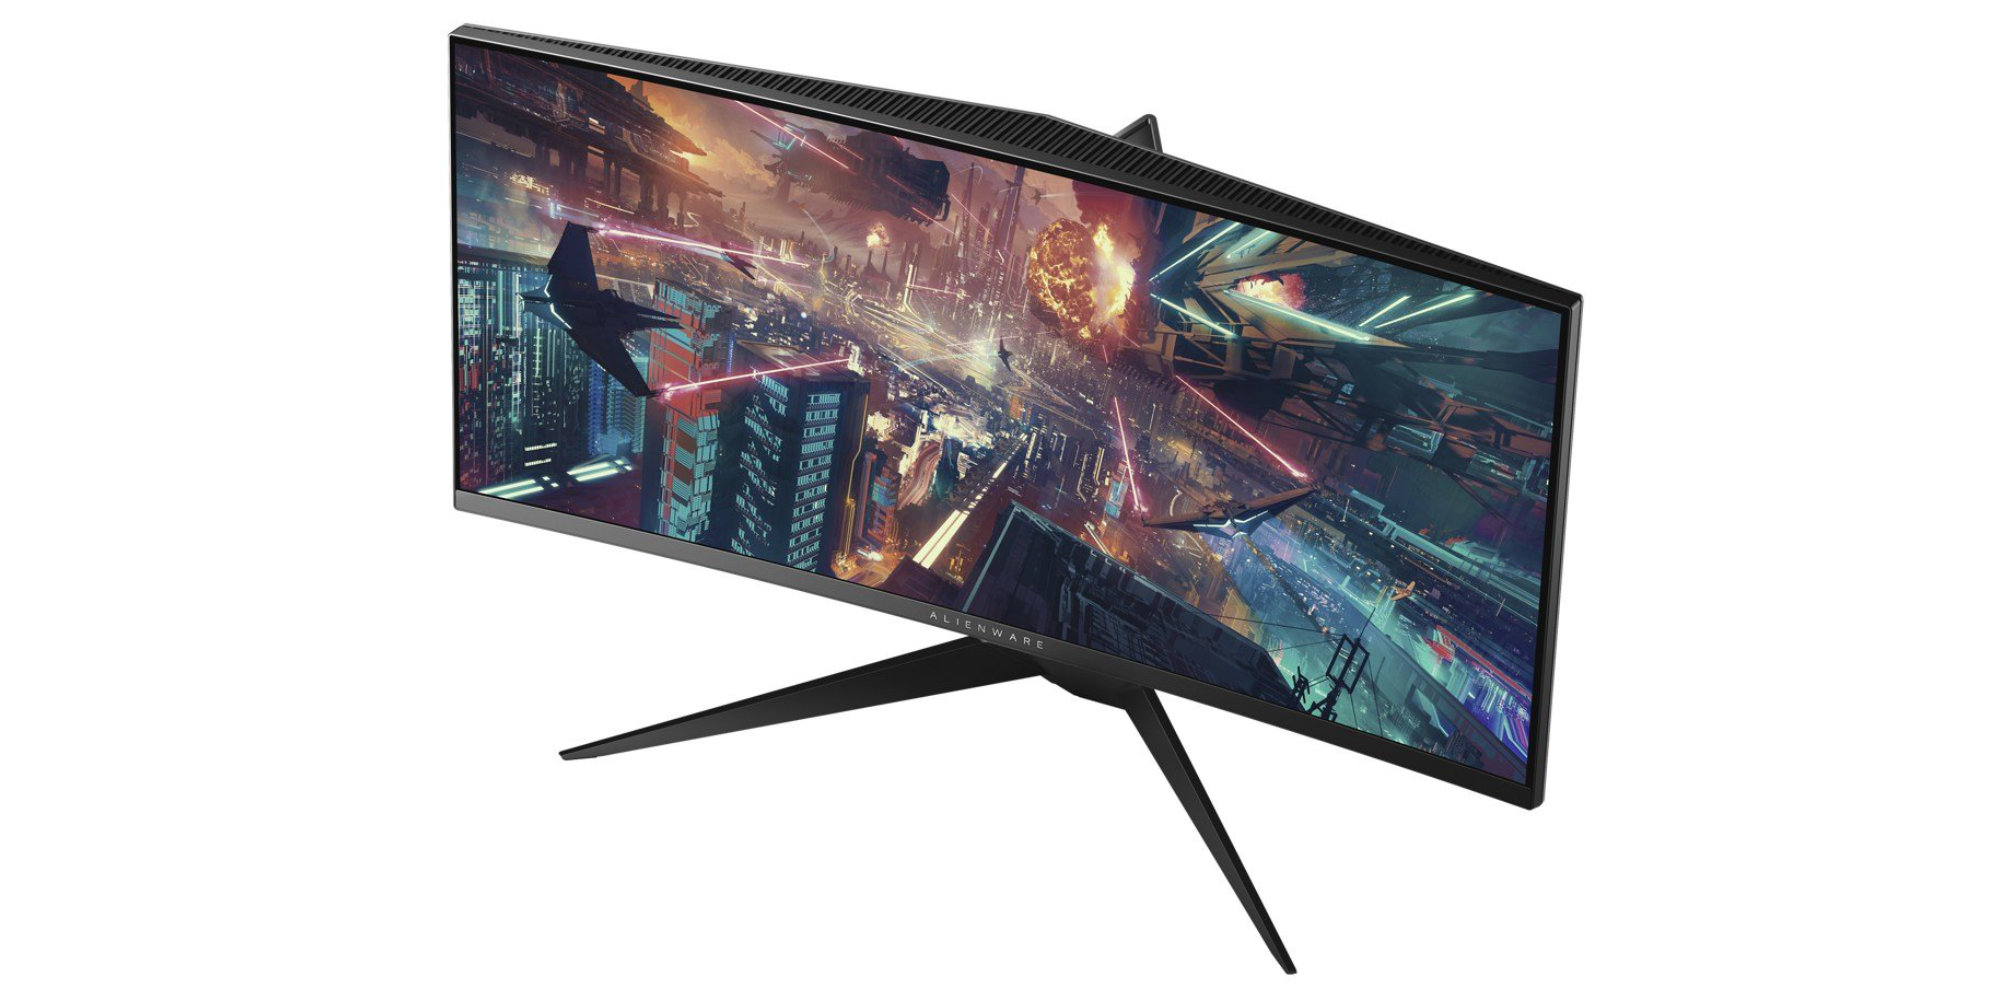 Game on this curved Alienware 34-inch 1080p Monitor for $590 (Reg. $800